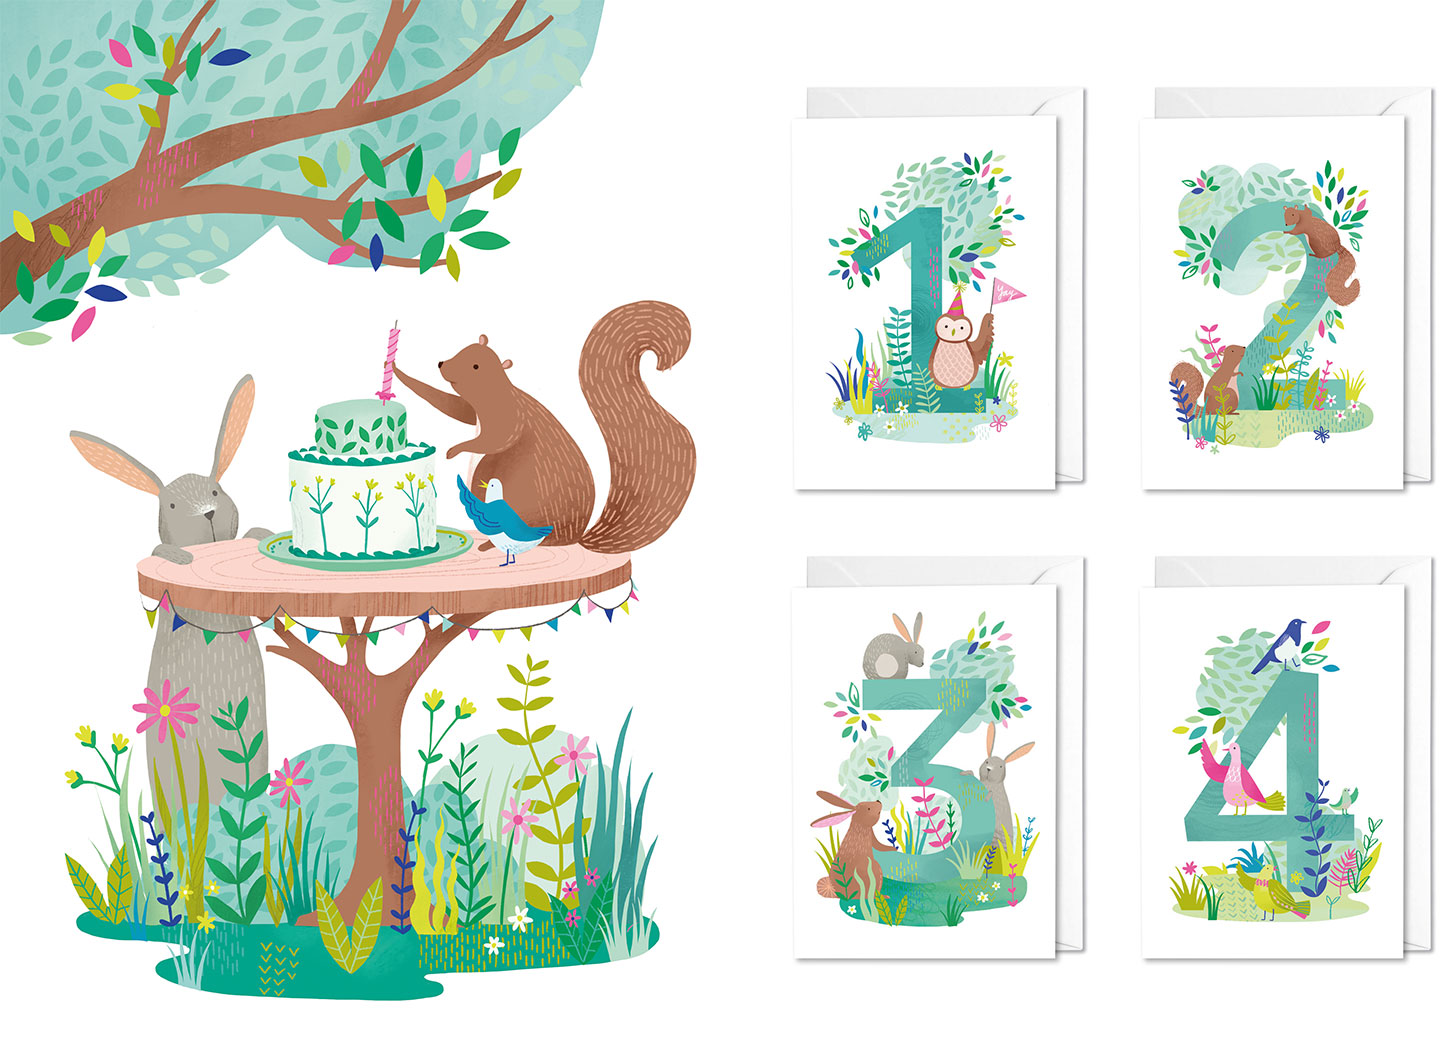 Illustrations of forest animals and greetings card designs